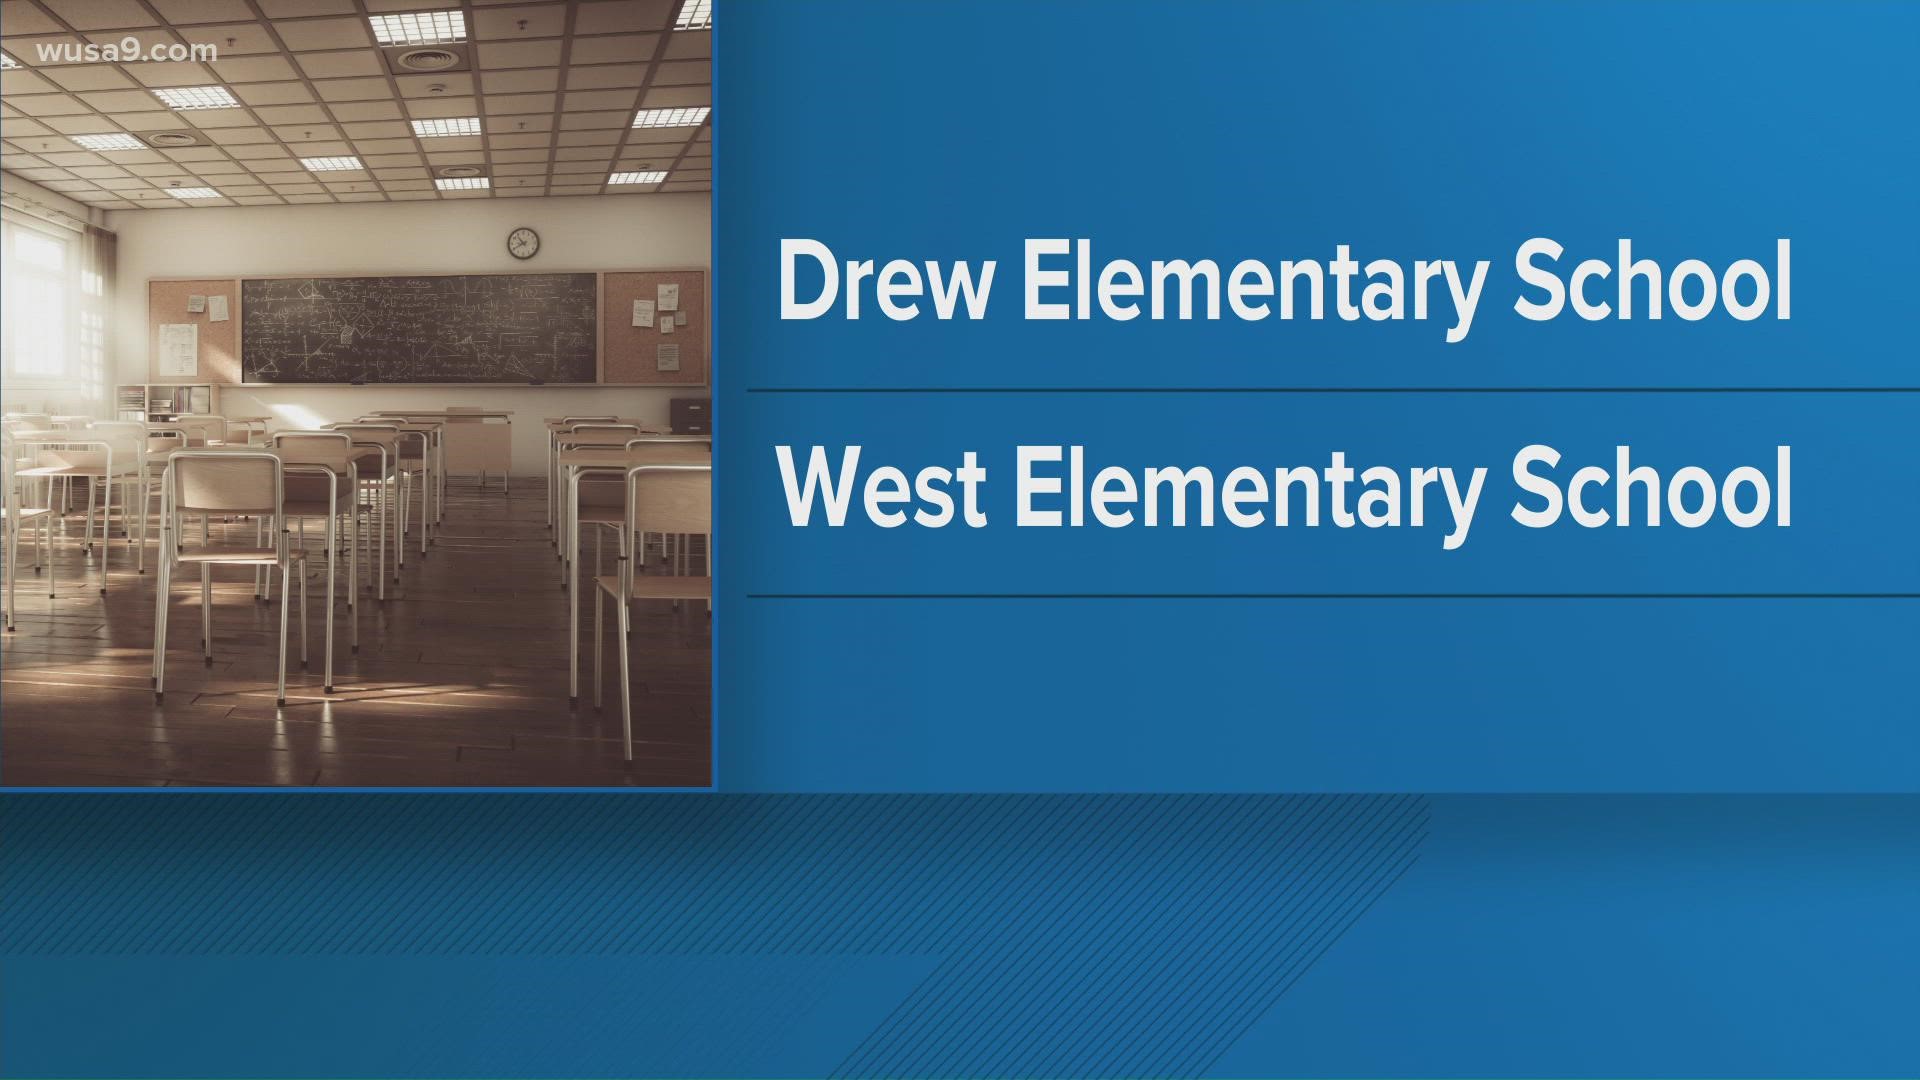 11 DCPS facilities have now made the decision to keep kids out of classrooms until after winter break.